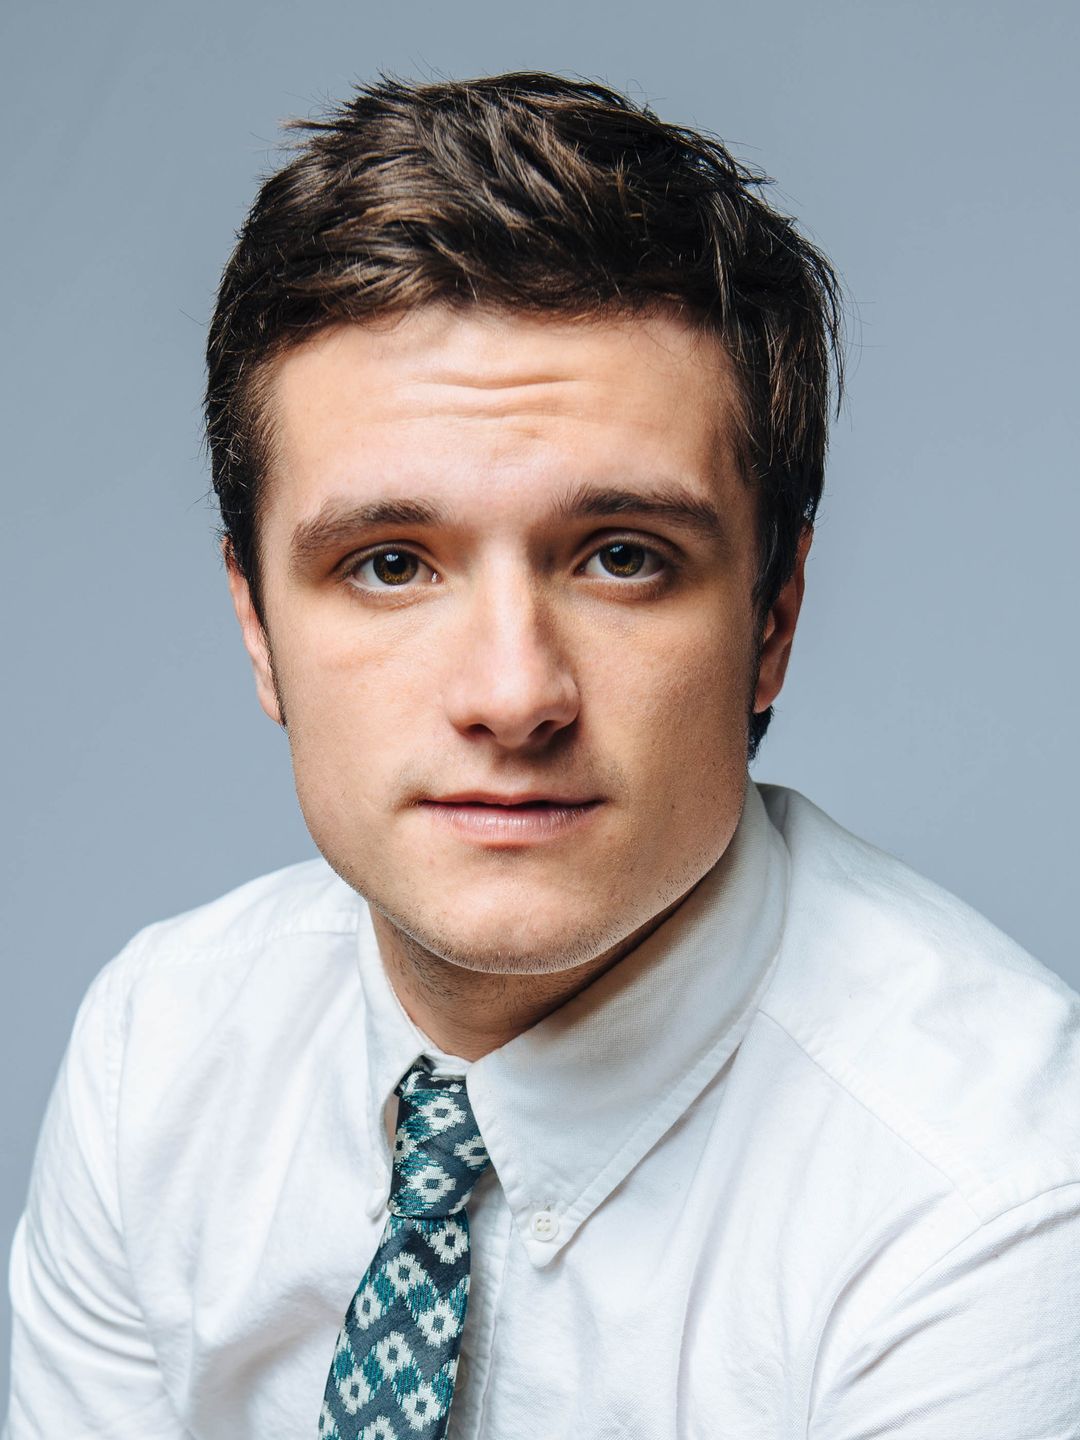 Josh Hutcherson how did he became famous